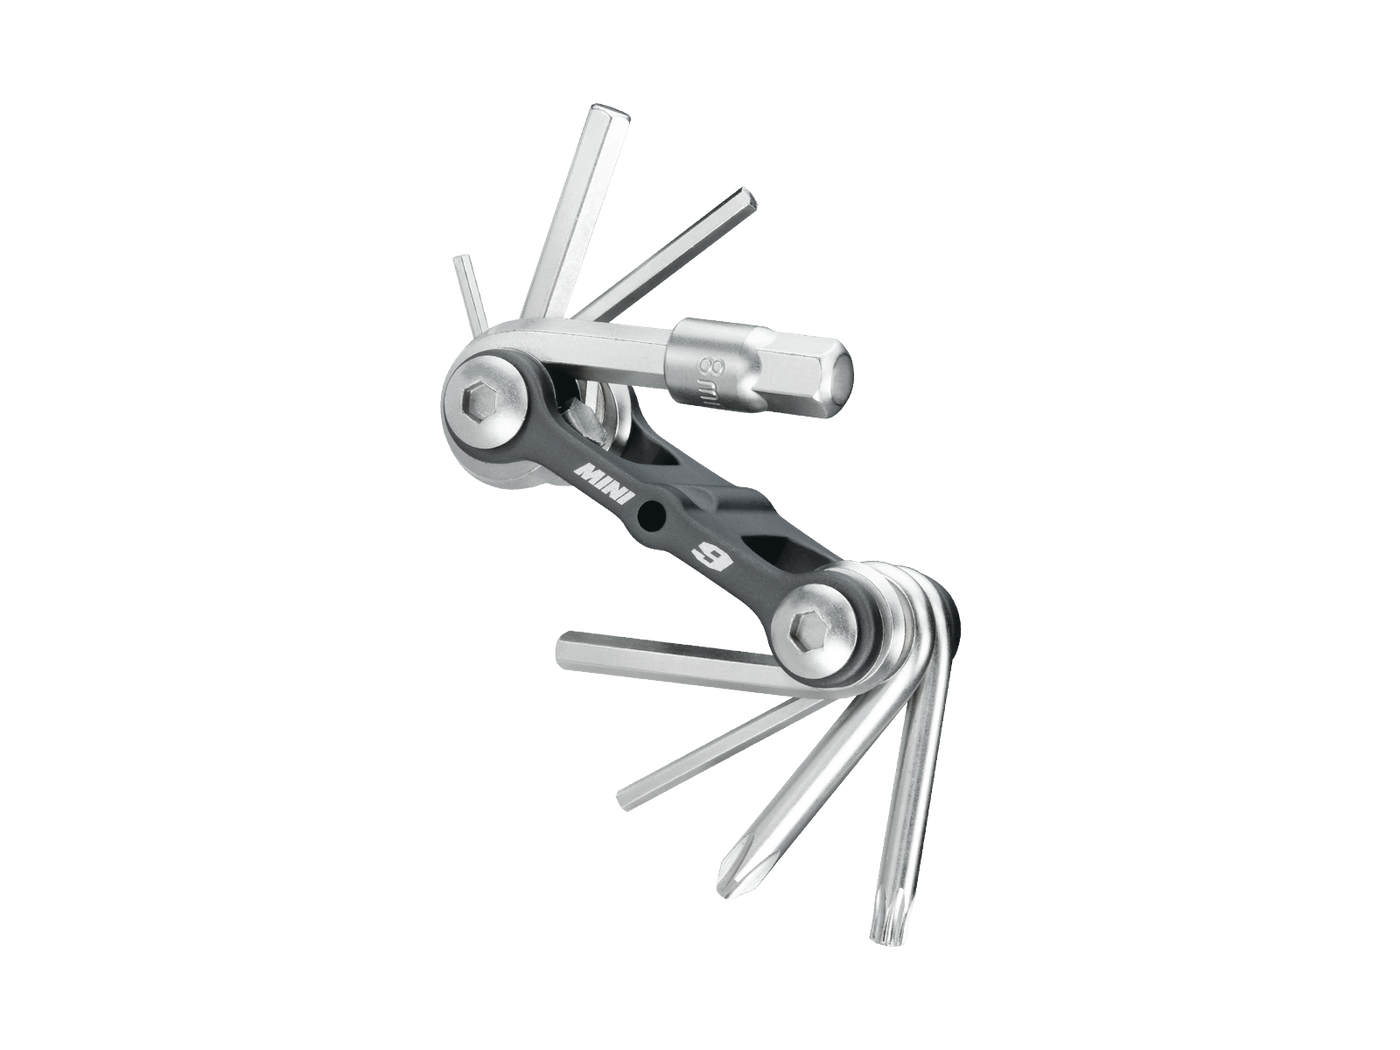 Topeak Mini 9 Multi Function Bicycle Tool Hardened Multitool With Bag - Cyclop.in